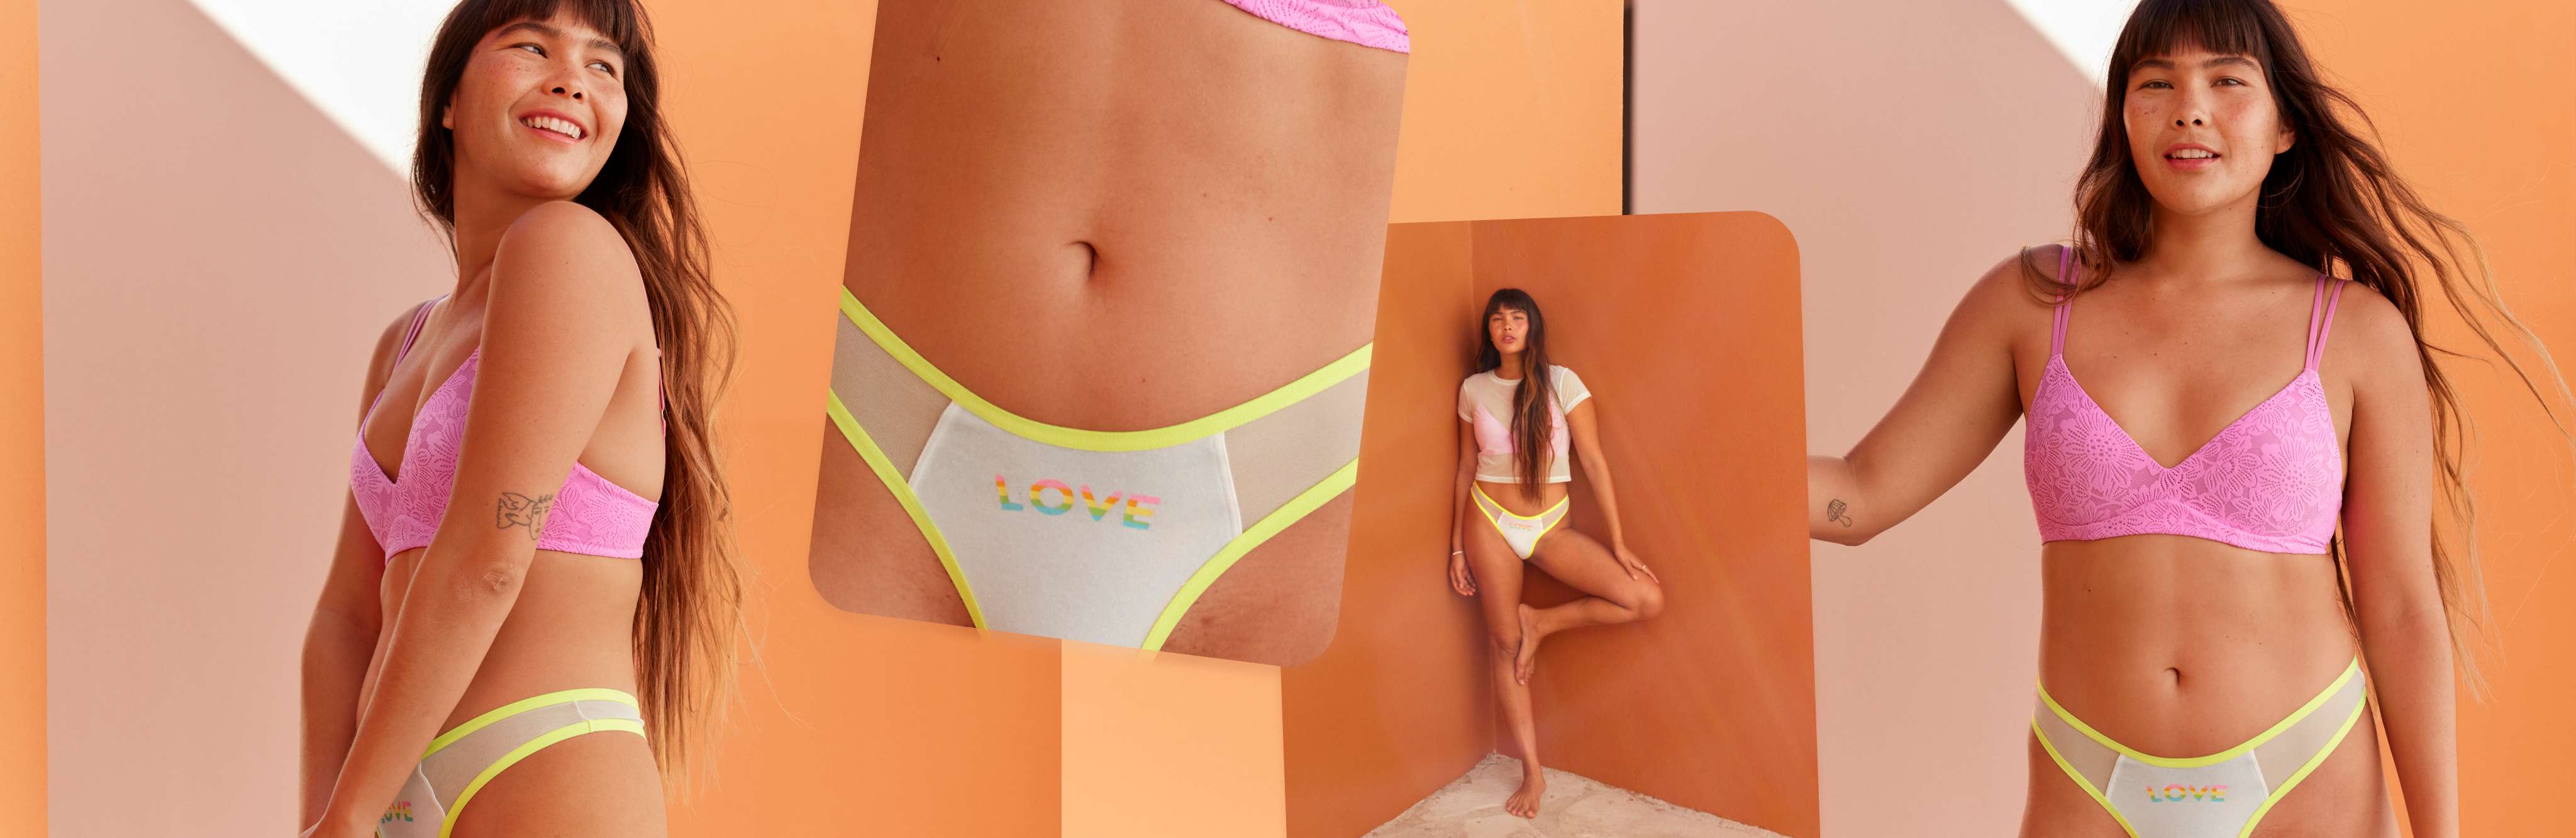 Model in Aerie Pride collection apparel 